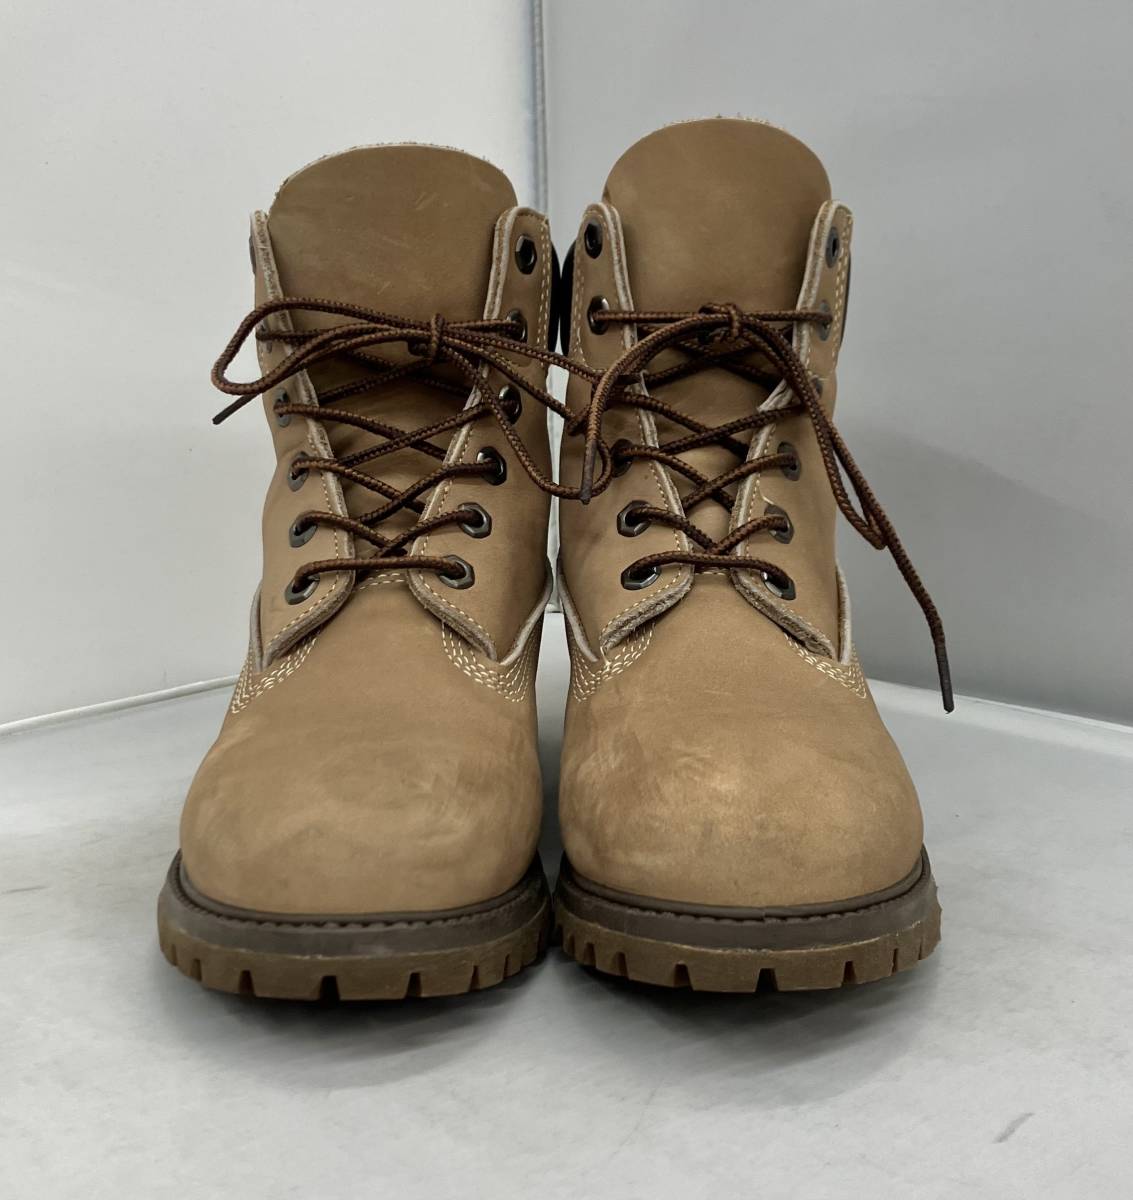  beautiful goods / Timberland / Timberland / ICON 6inch Premium Boot / 90s / Work boots / size :6w( approximately 24cm) / 10366 / ocher / box equipped 